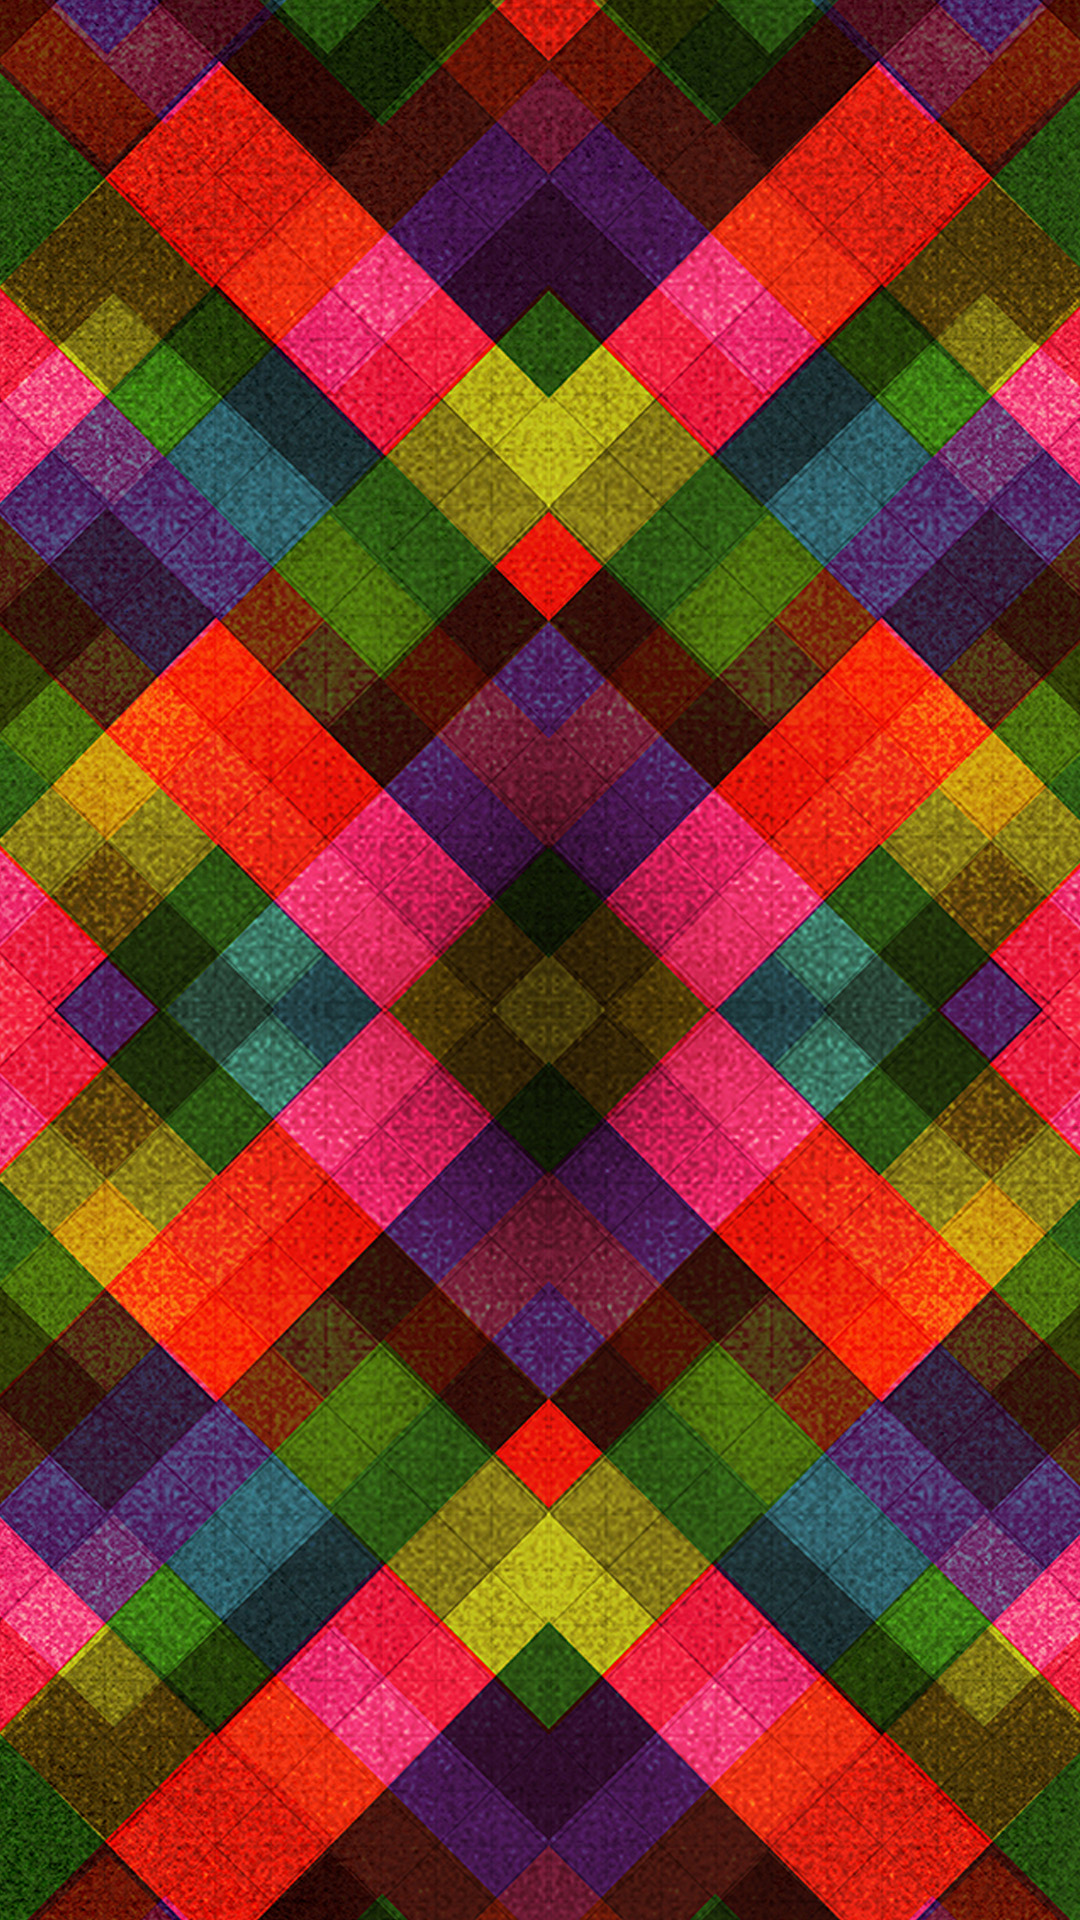 Colorful 114 Android wallpaper